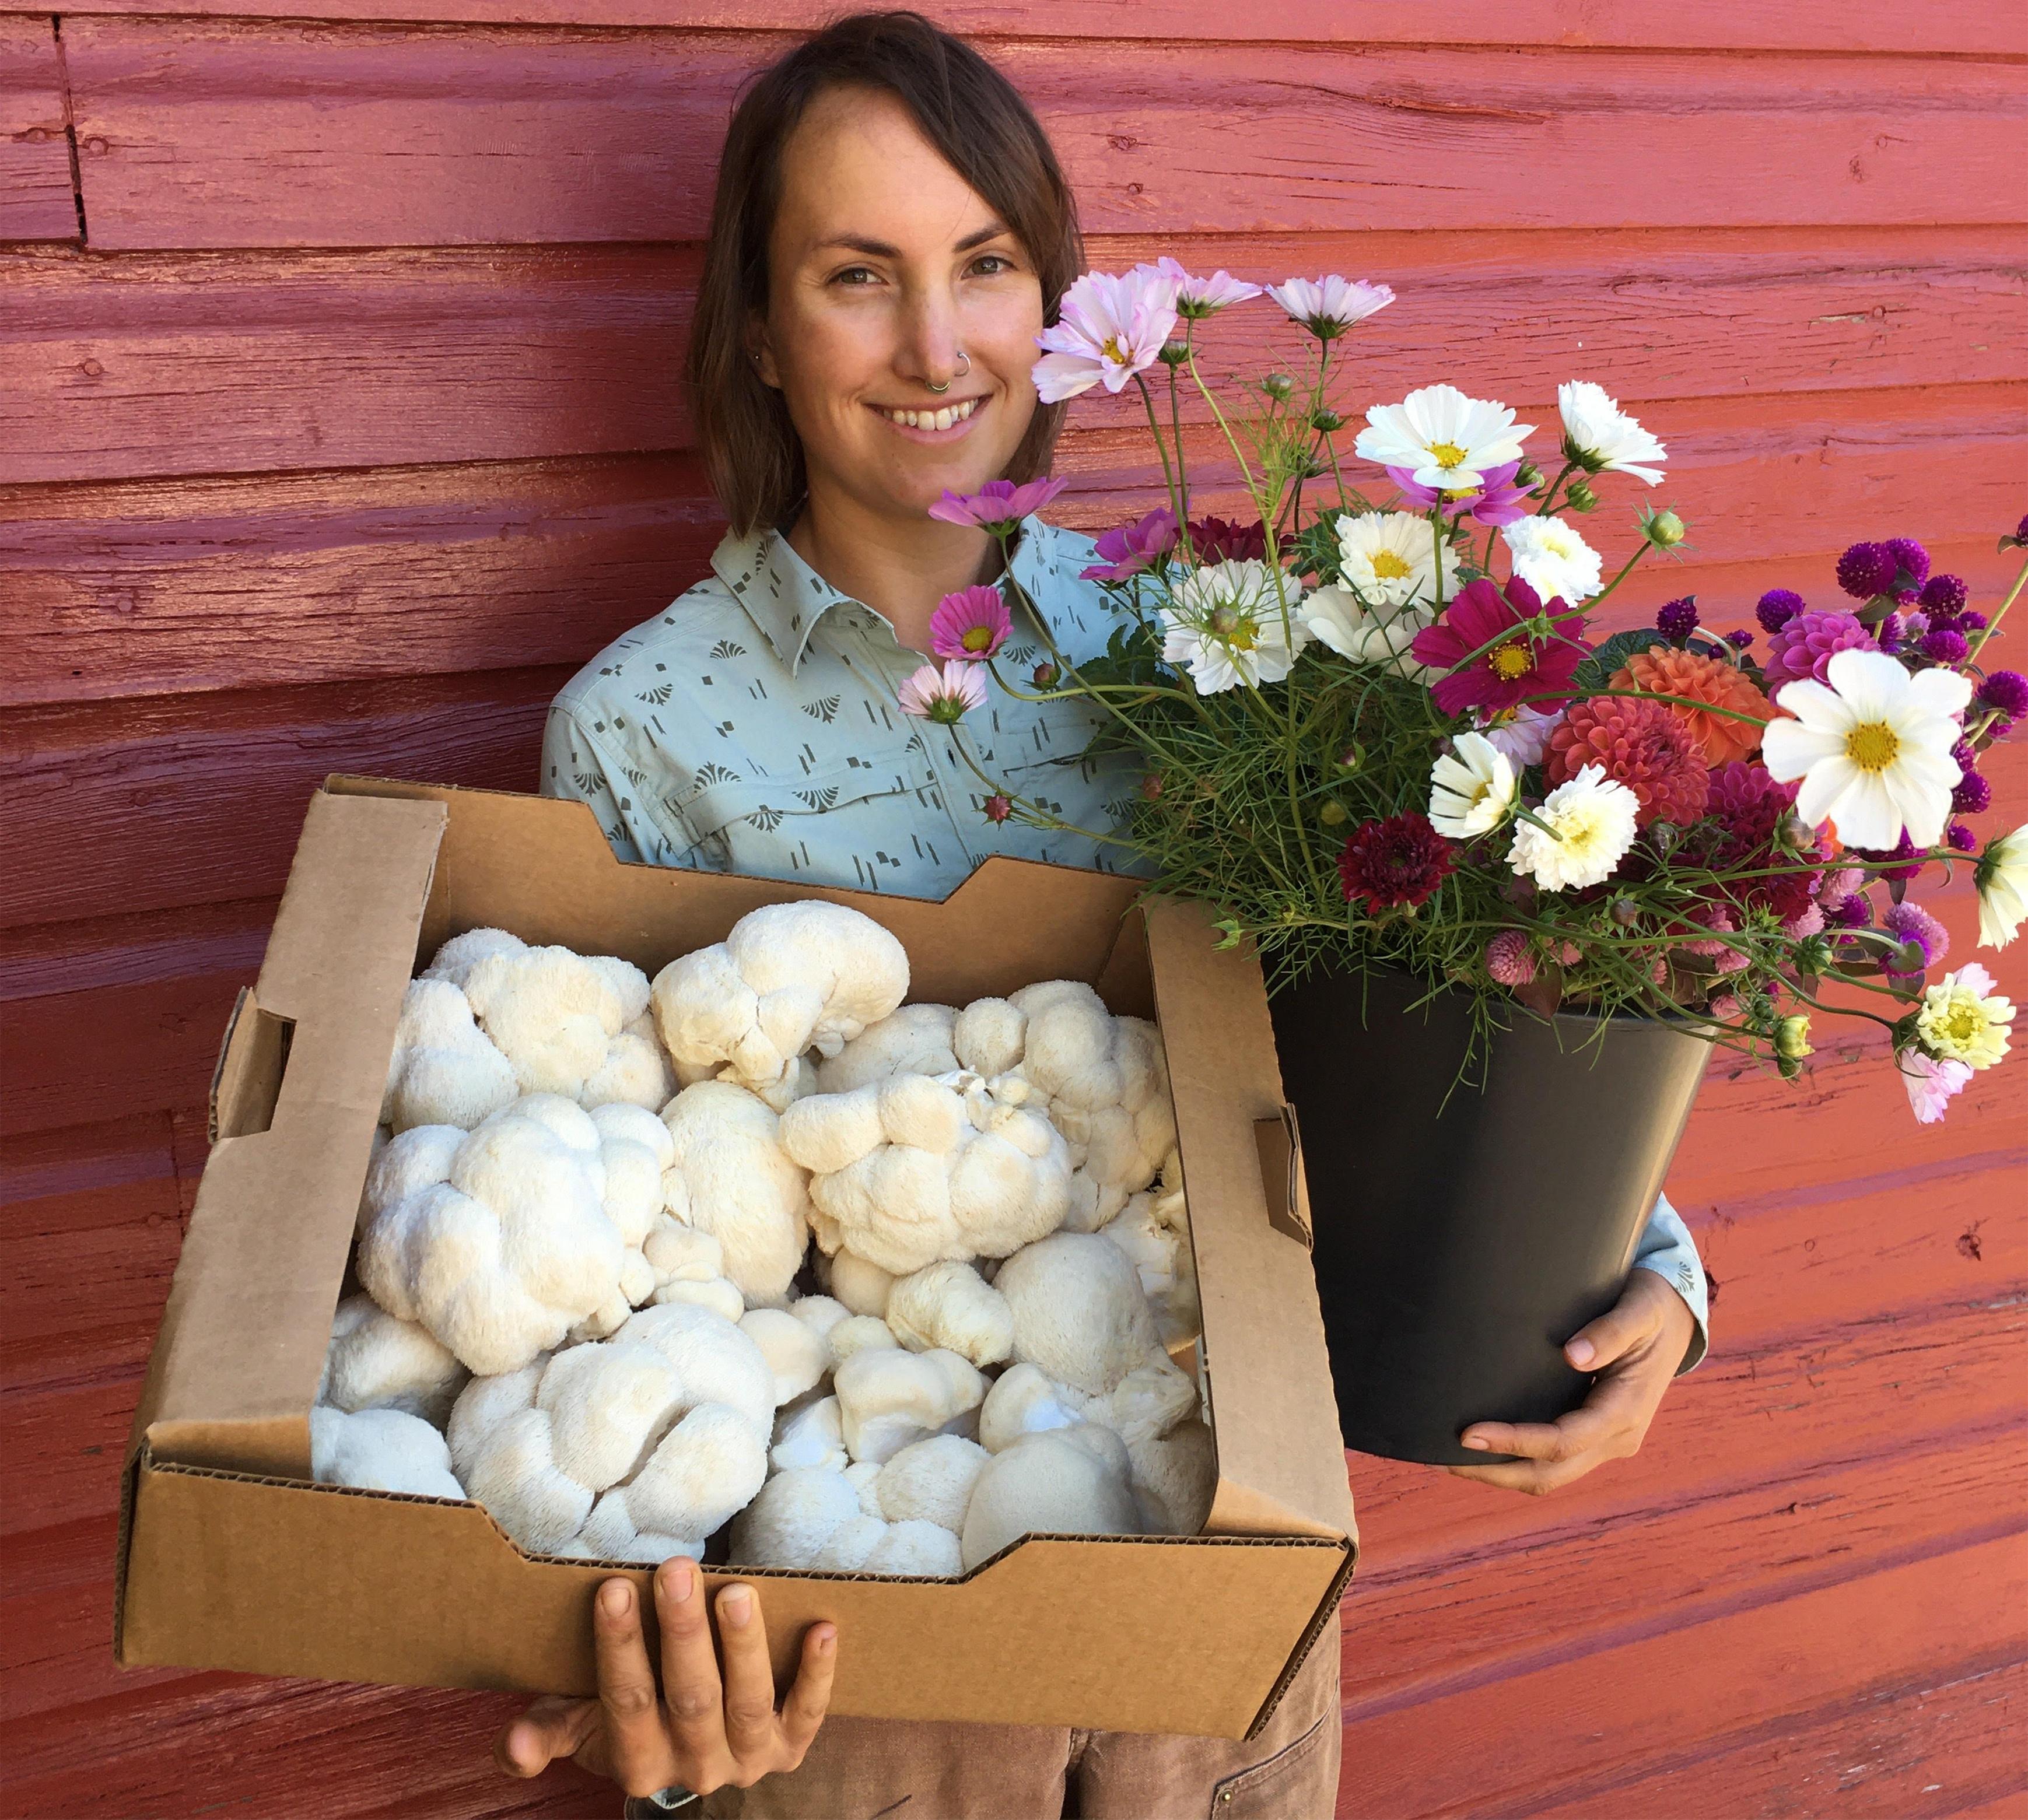 Farmer, Courtney Cohen, holding a box of mushrooms in her right hand and a pot of flowers in her left hand.